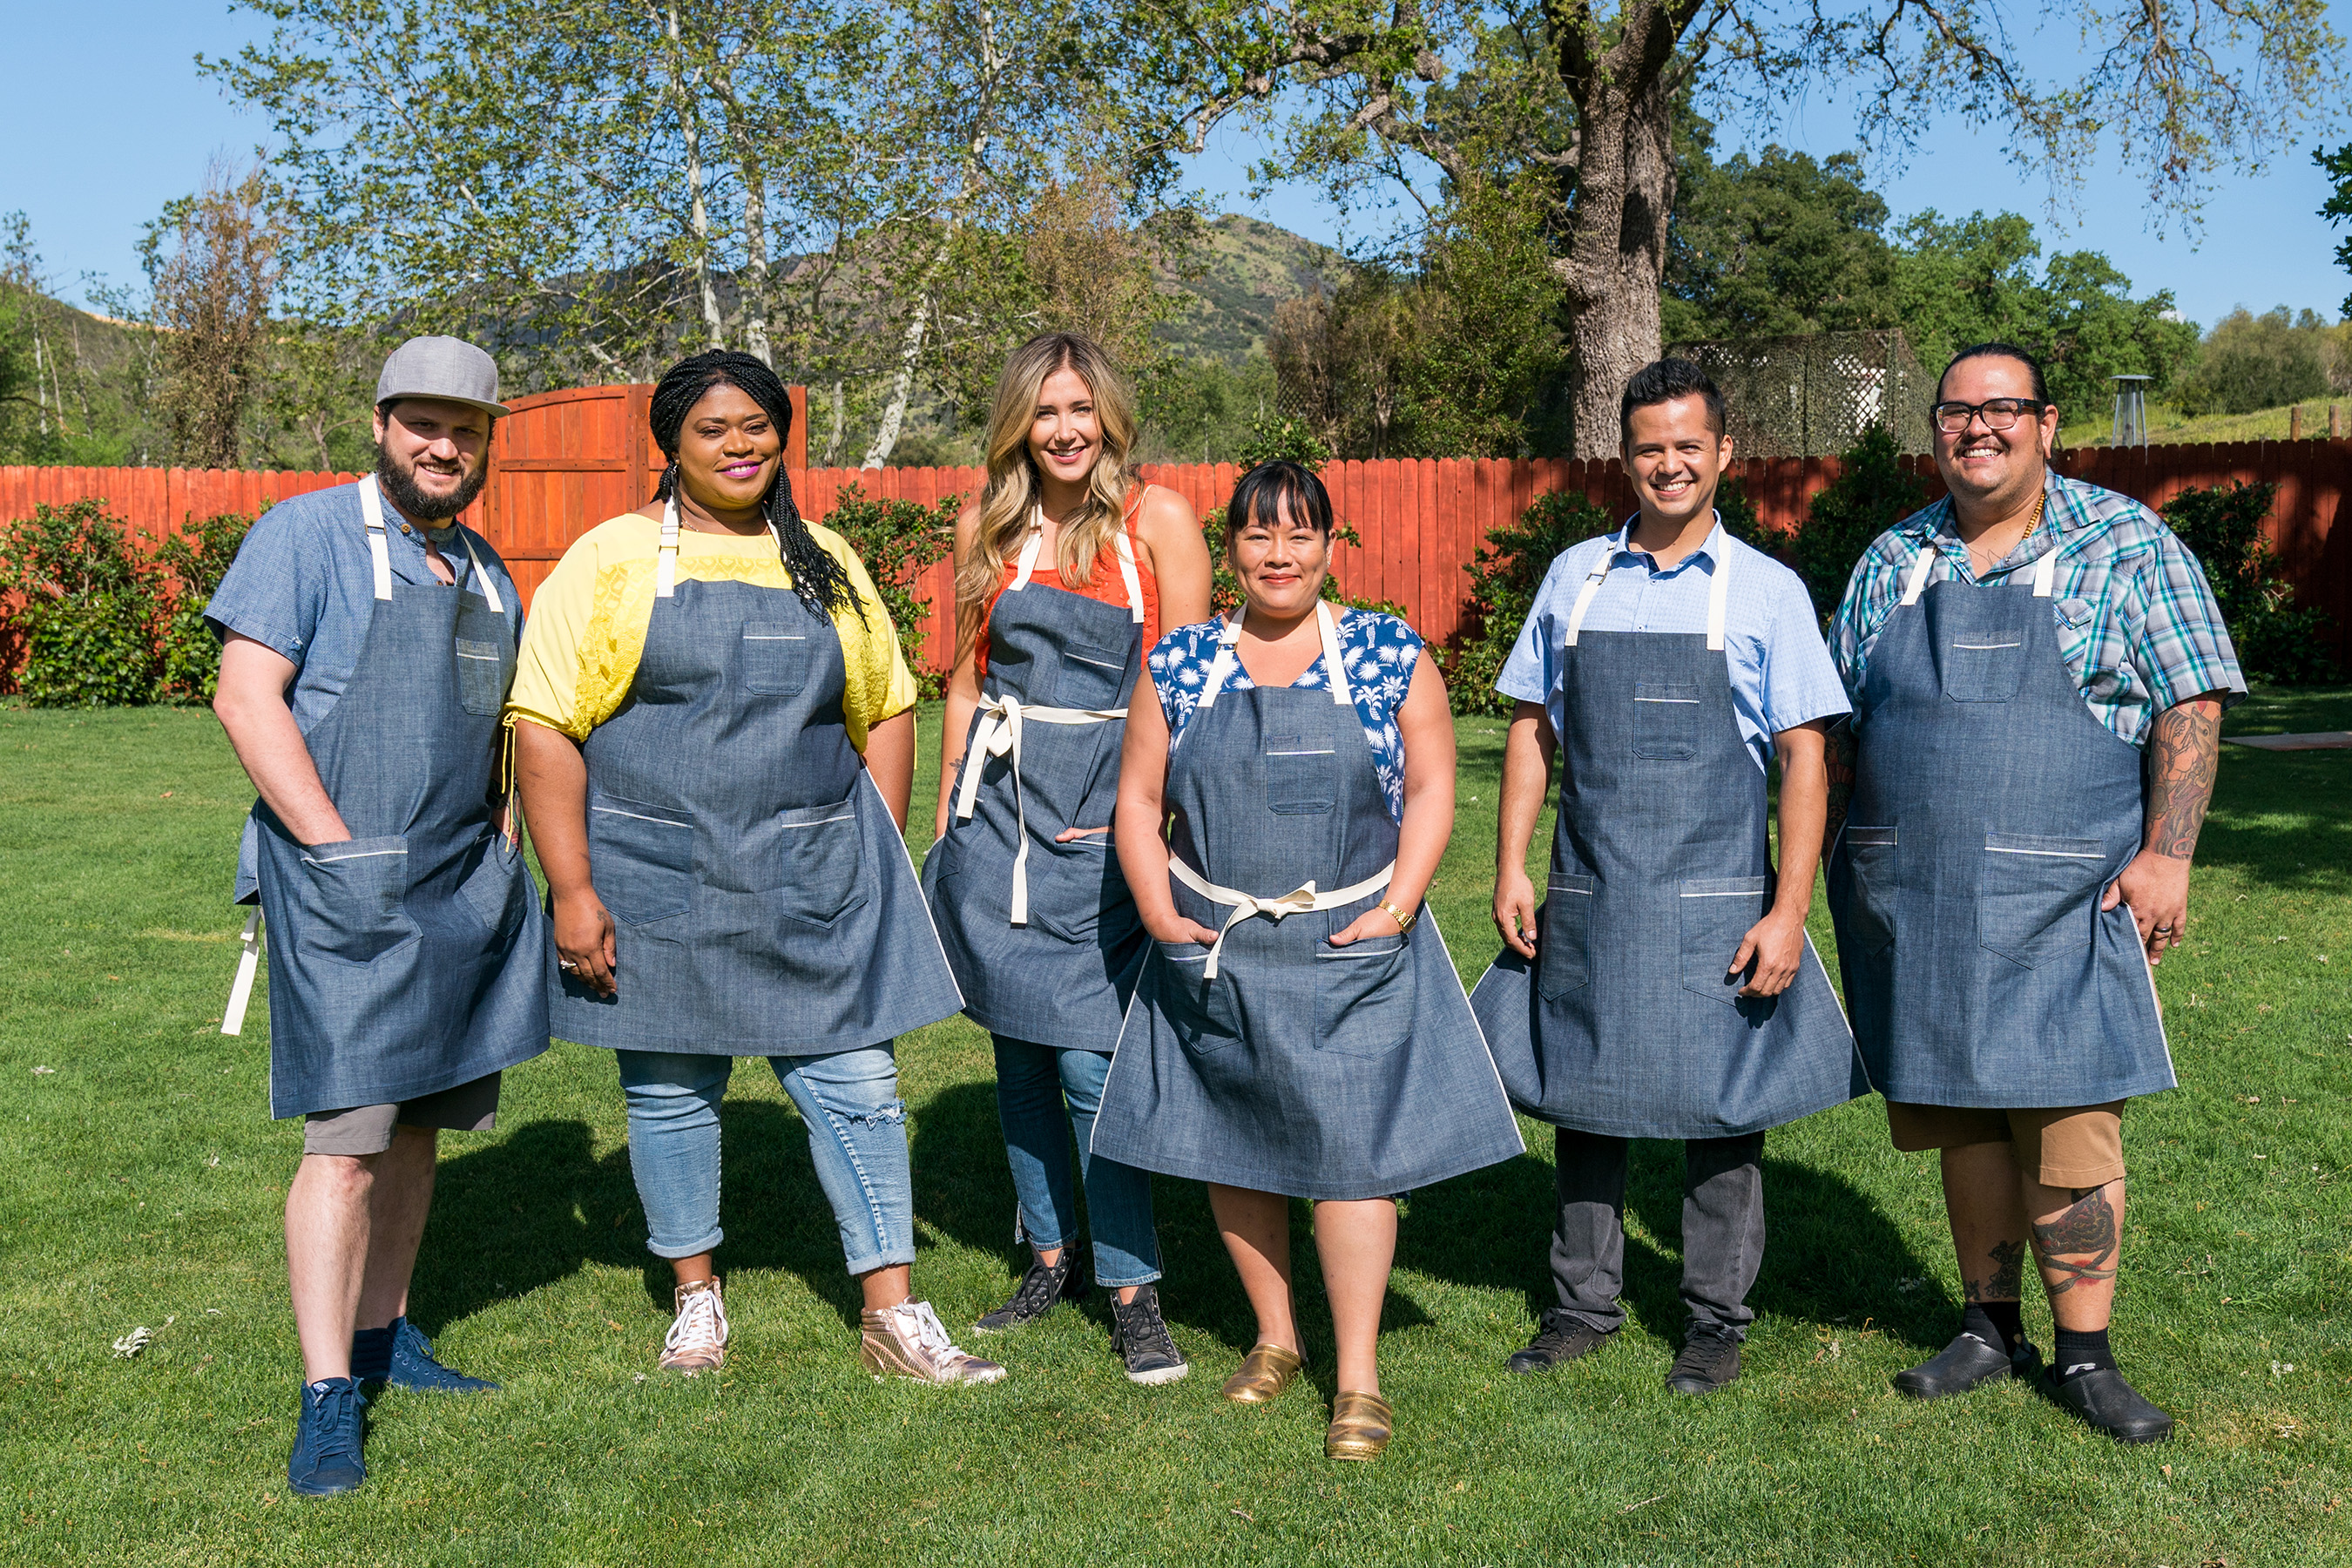 The competitors of Food Network's Ultimate Summer Cook-Off